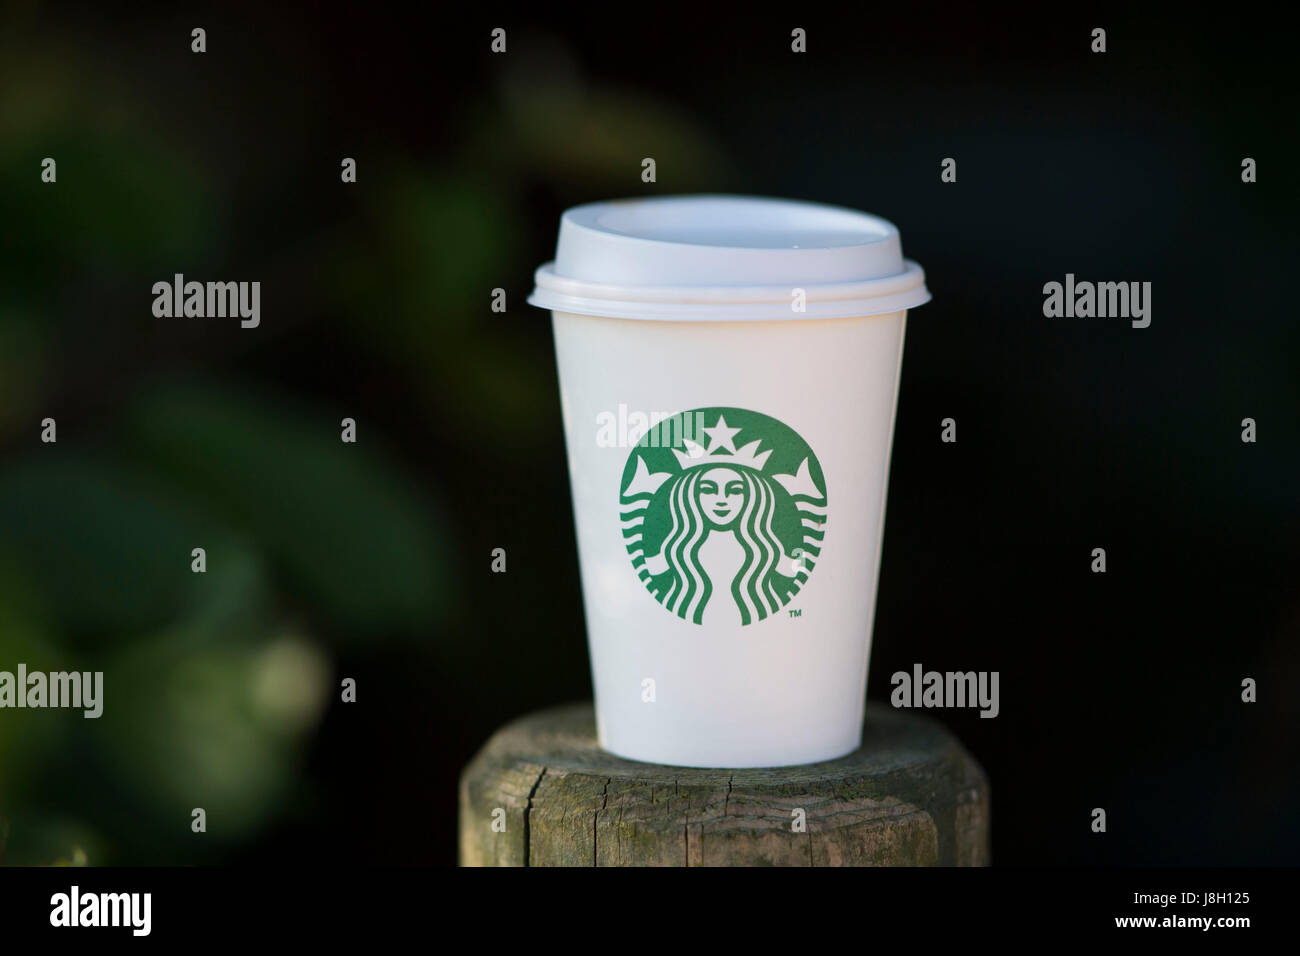 A takeaway Starbucks coffee cup seen on a plain green out of focus background. Stock Photo